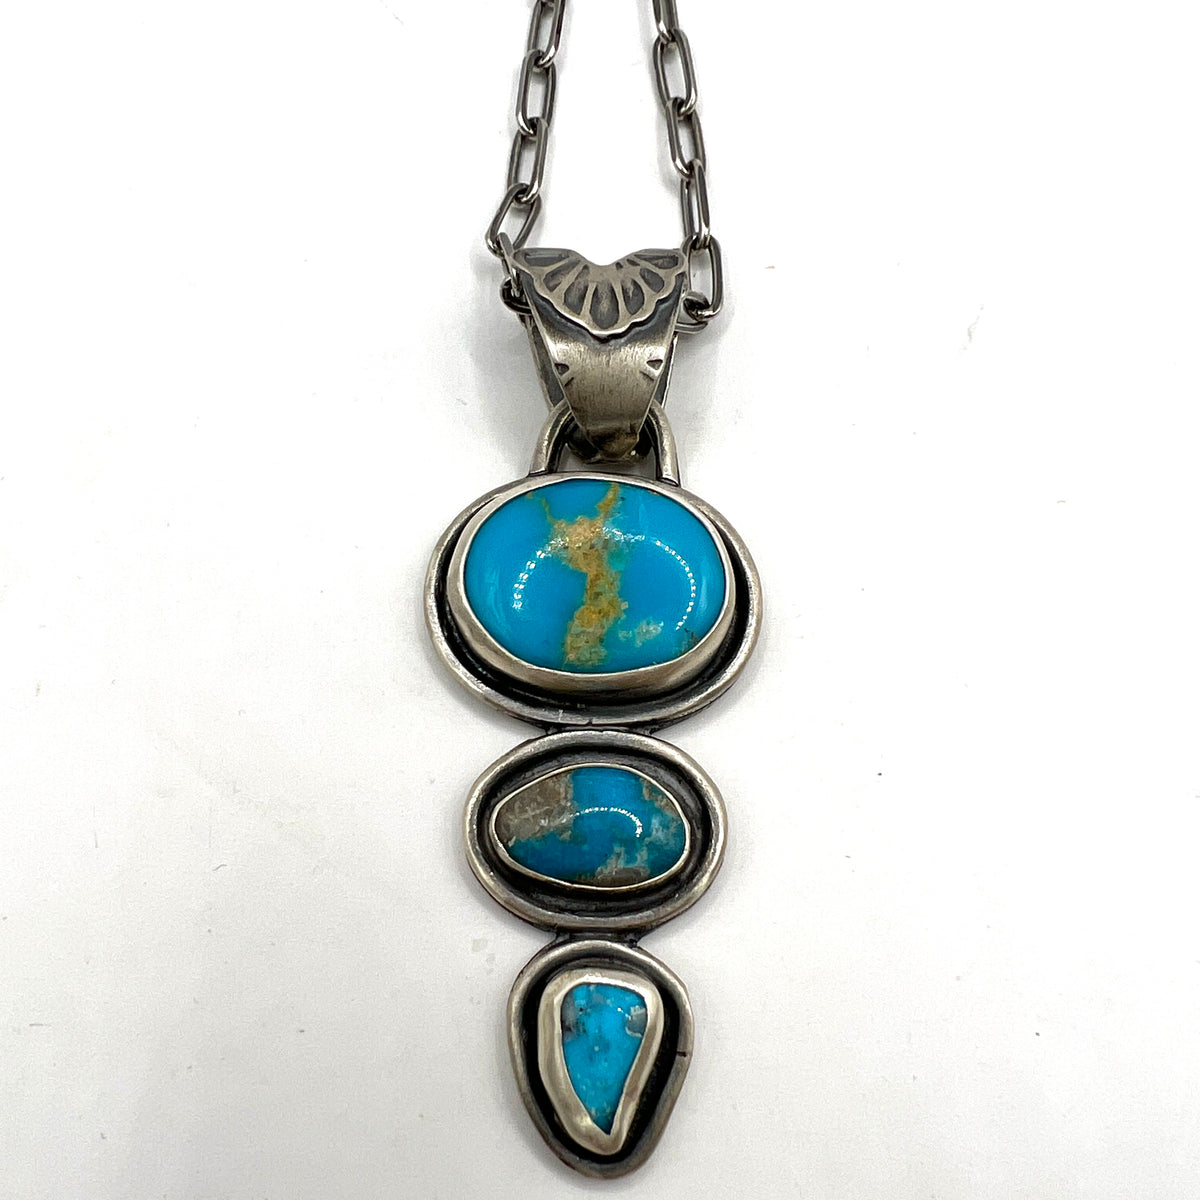 “Let’s Hold Hands” Necklace in Triple Blue Bandit Turquoise